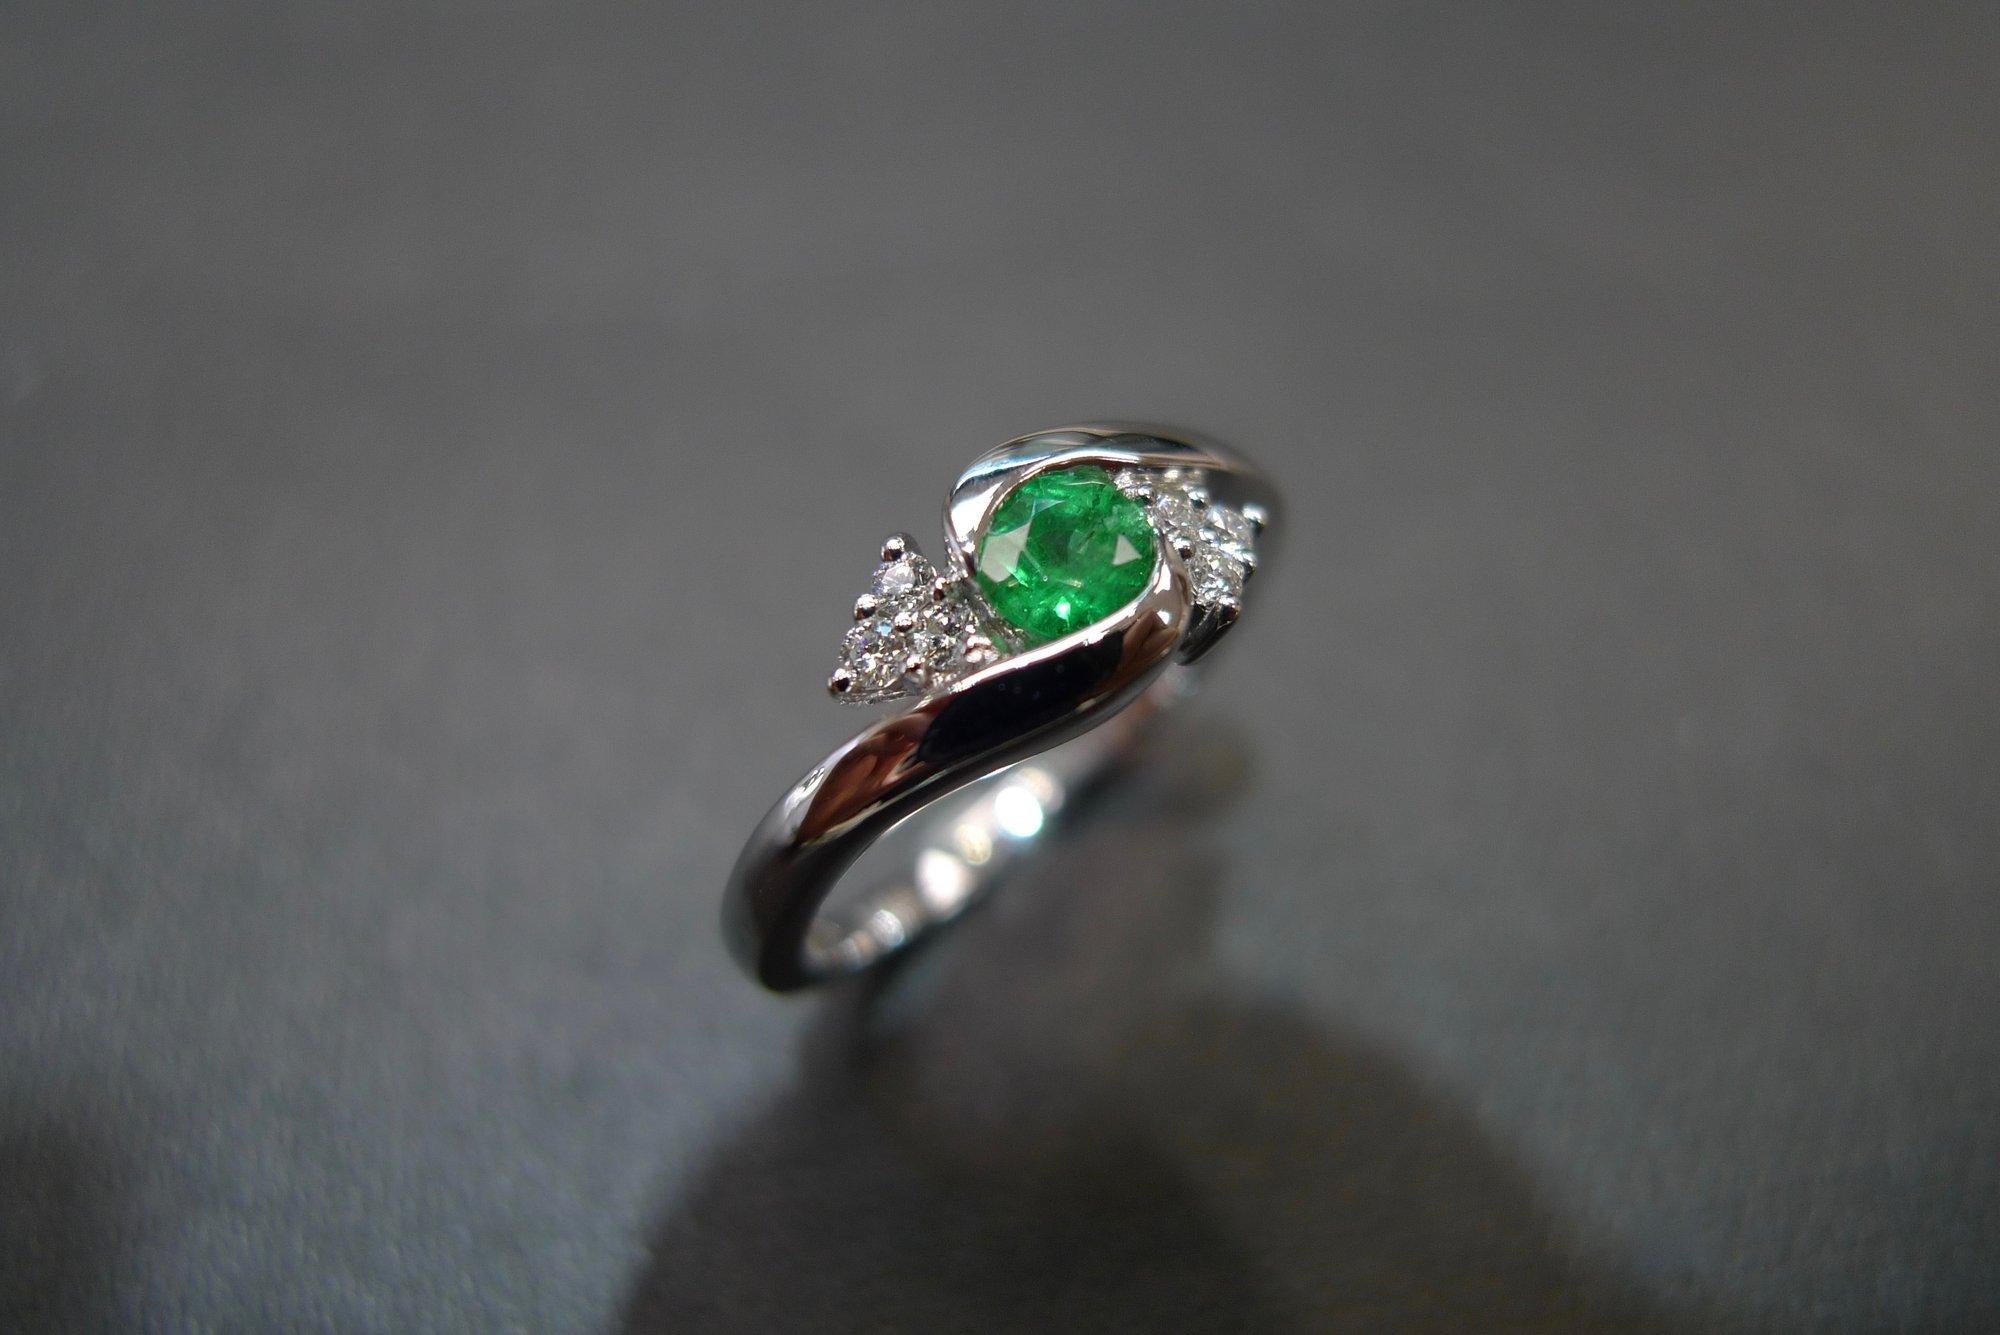 For Sale:  Tension Twist Round Cut Emerald and Diamond Engagement Ring in 18K White Gold 5